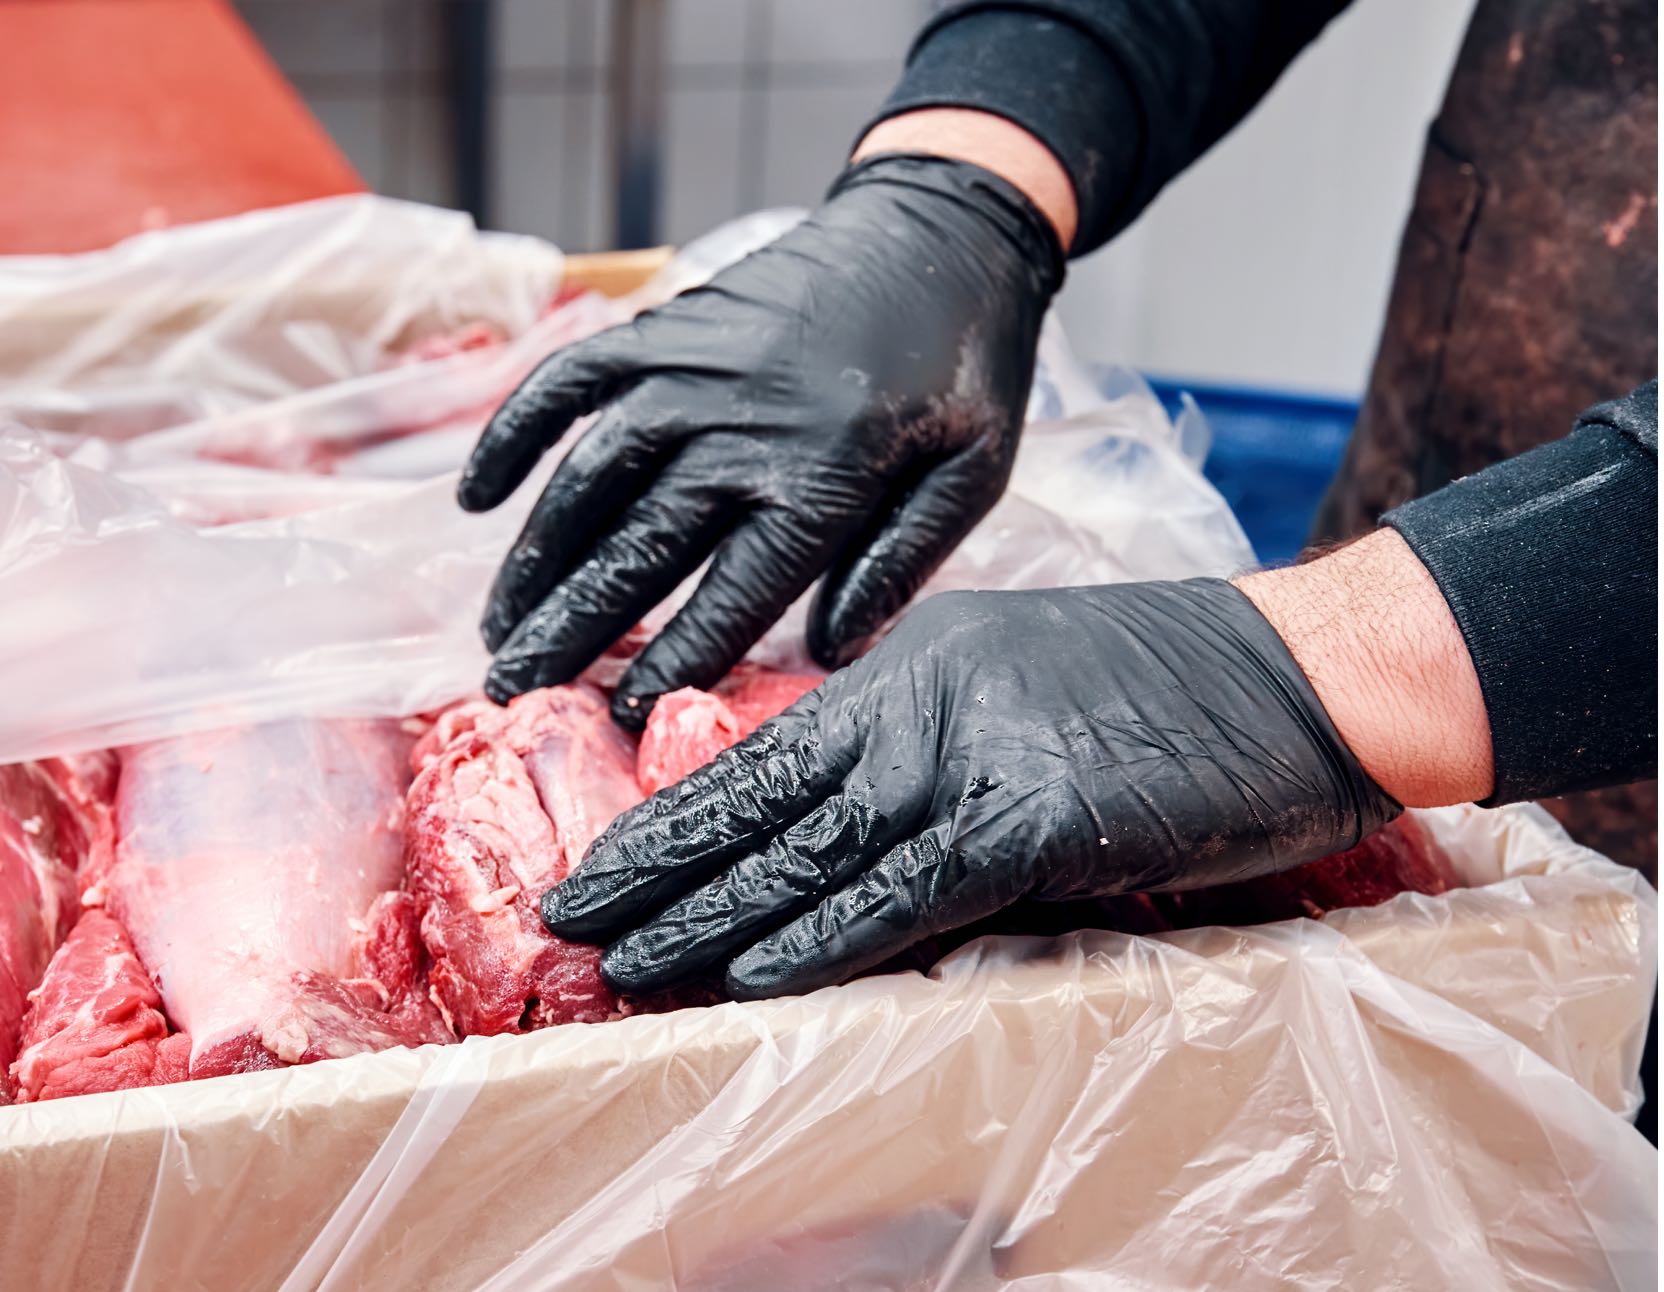 A person packing meat into a container.